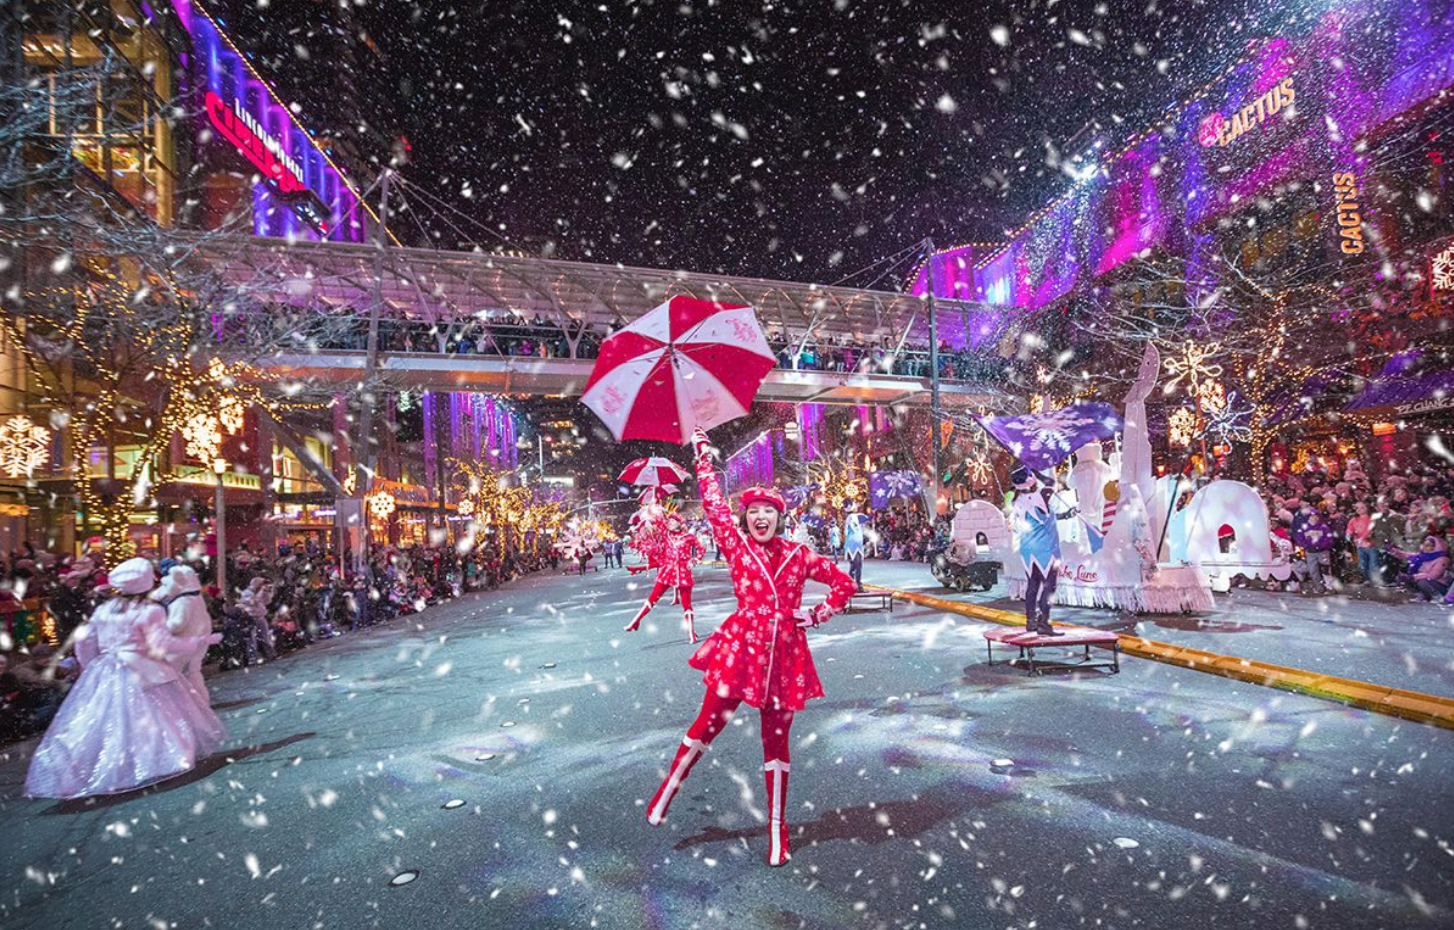 See the Magic of the Season Come Alive at Snowflake Lane and Stay in Holiday Style